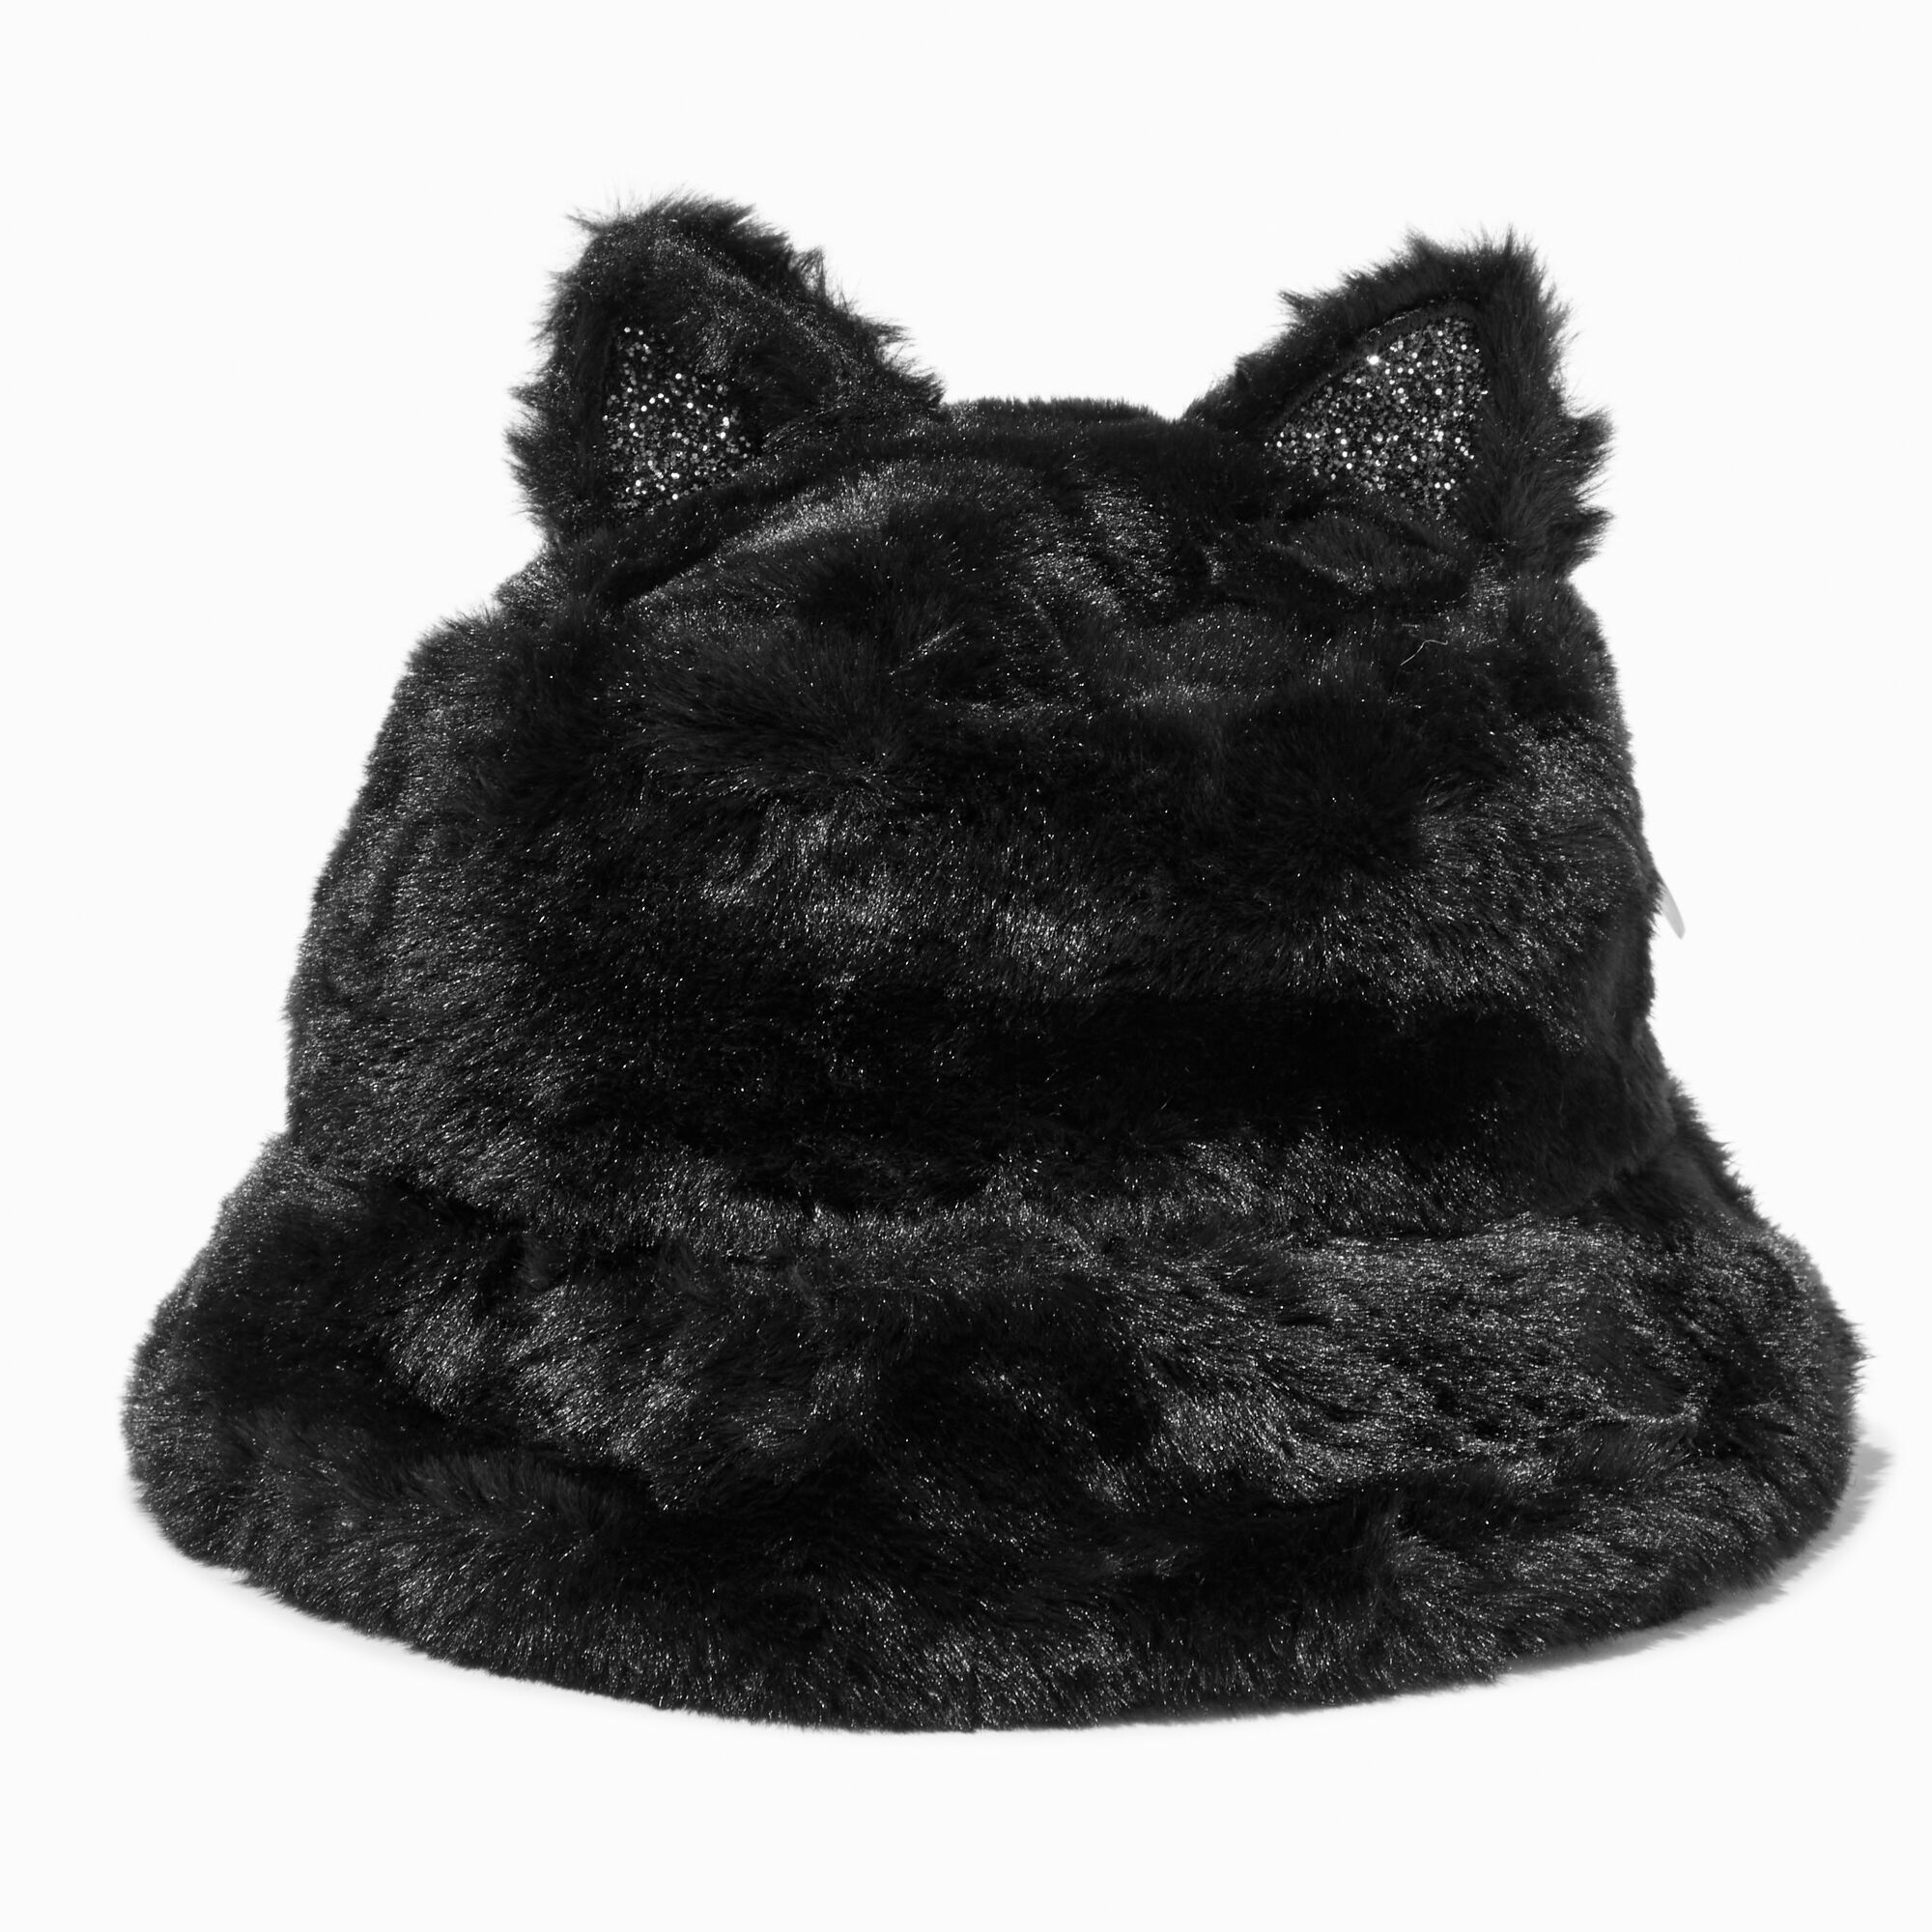 View Claires Cat Sherpa Bucket Hat Black information